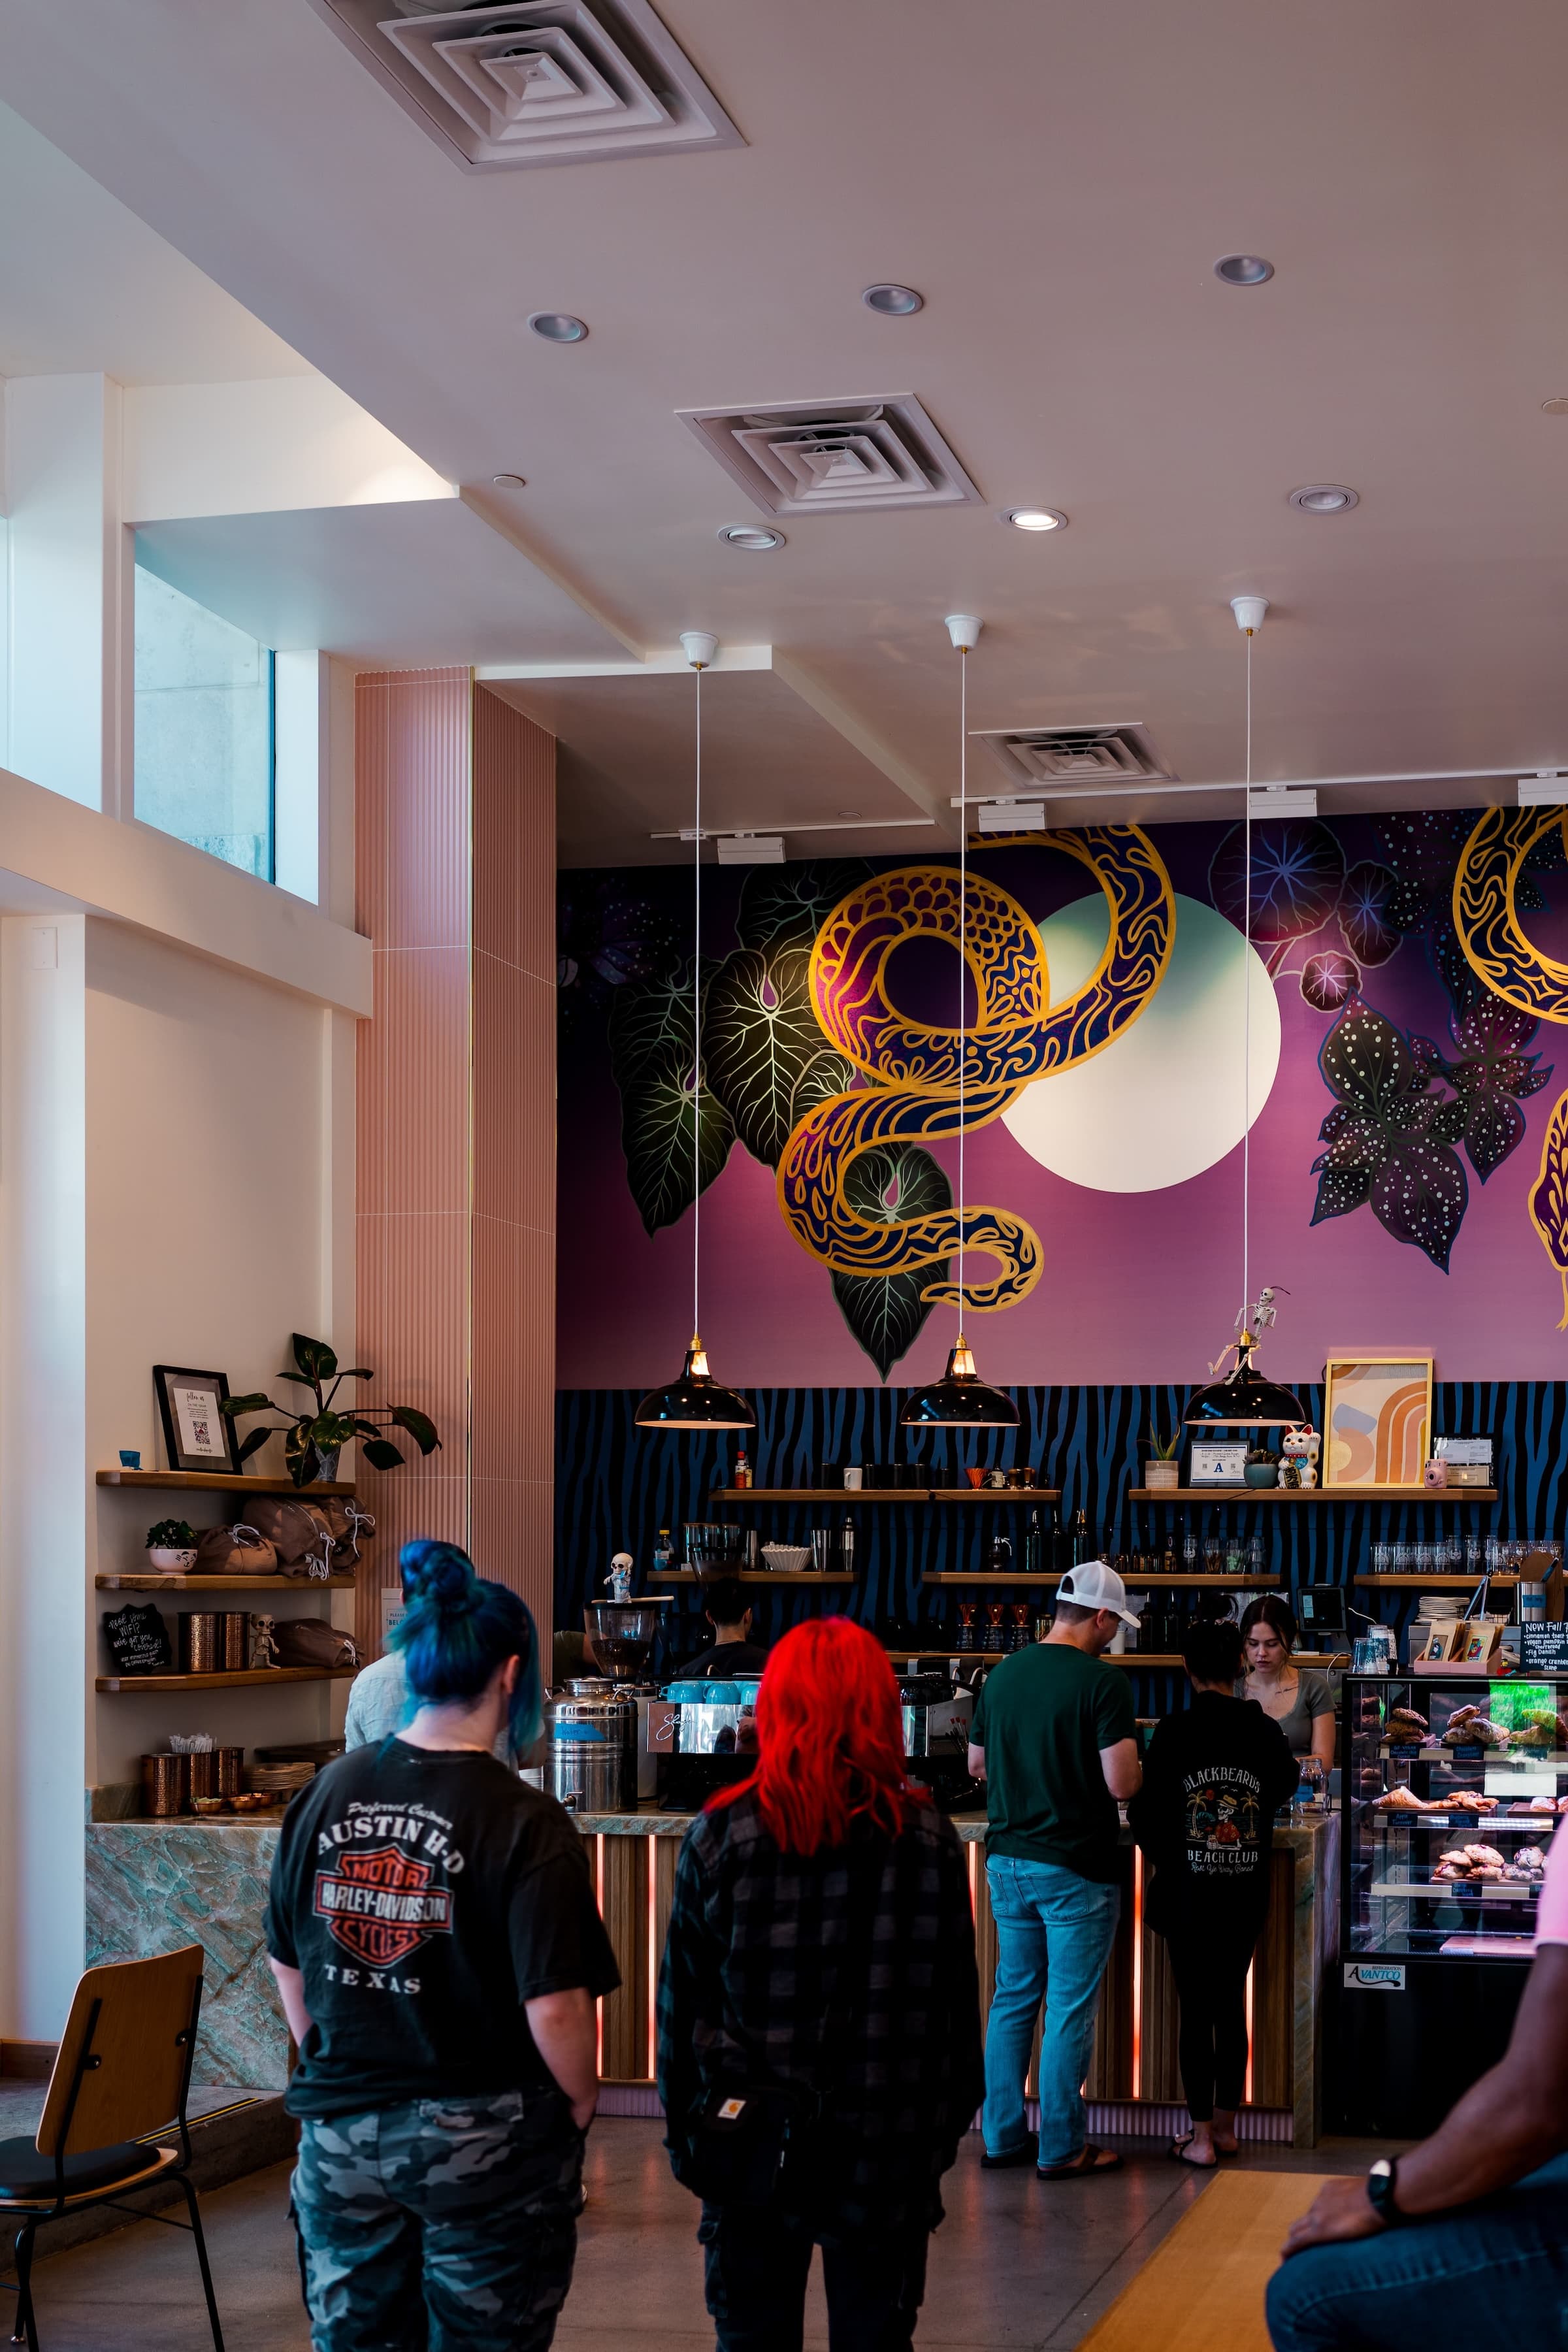 Customers stand in a modern cafe with vibrant cosmic-themed wall art, under a ceiling with recessed lighting and hanging pendant lamps.